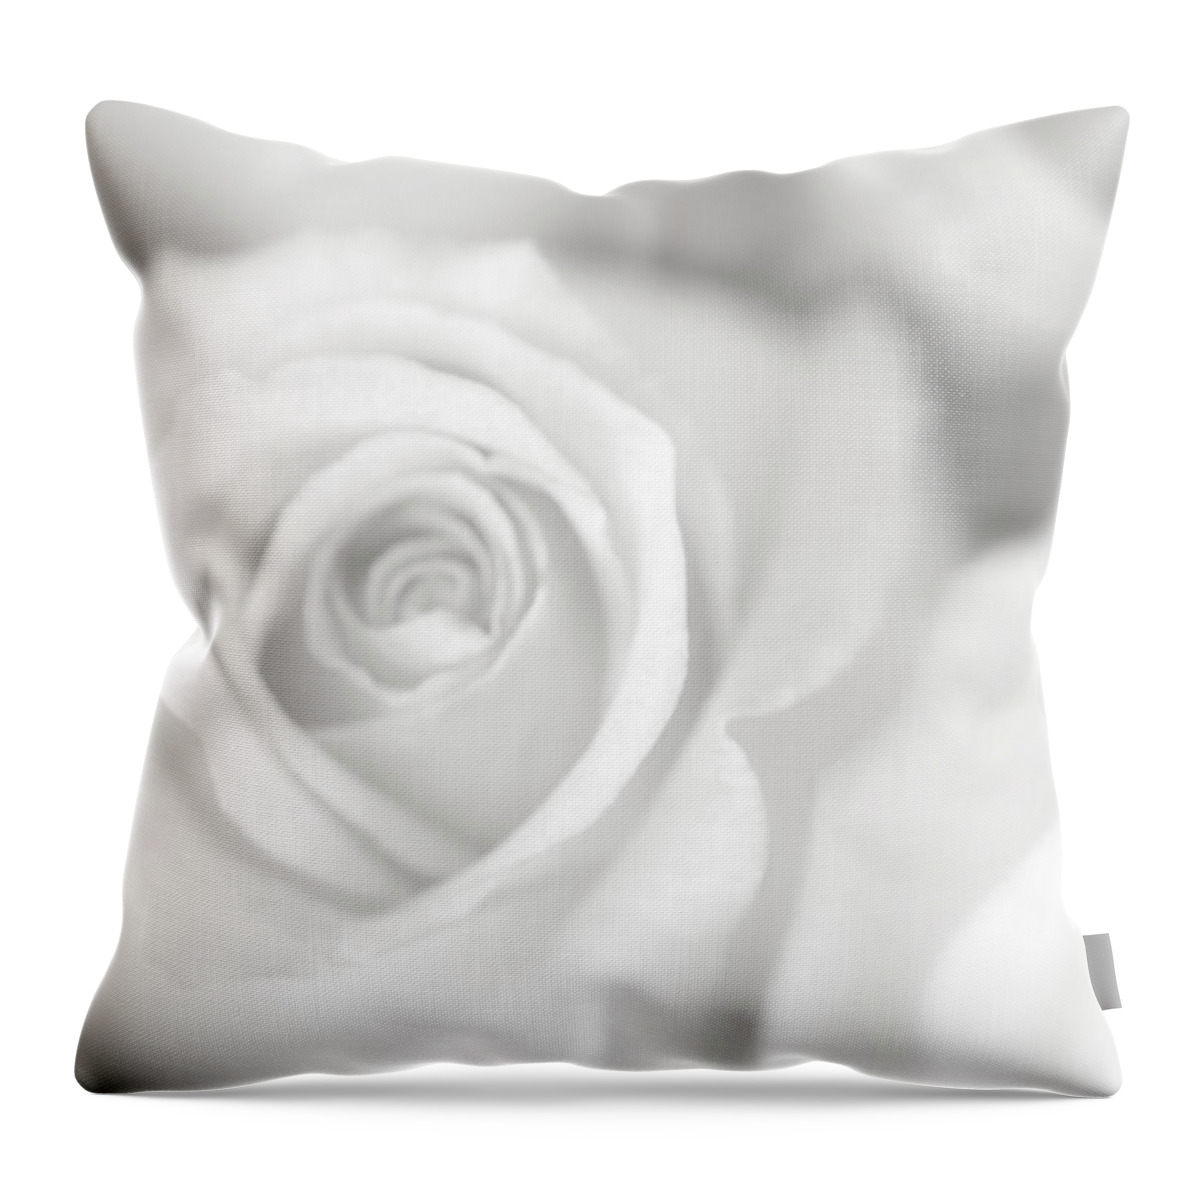 Photography Throw Pillow featuring the photograph Rose Studies II by James Mcloughlin